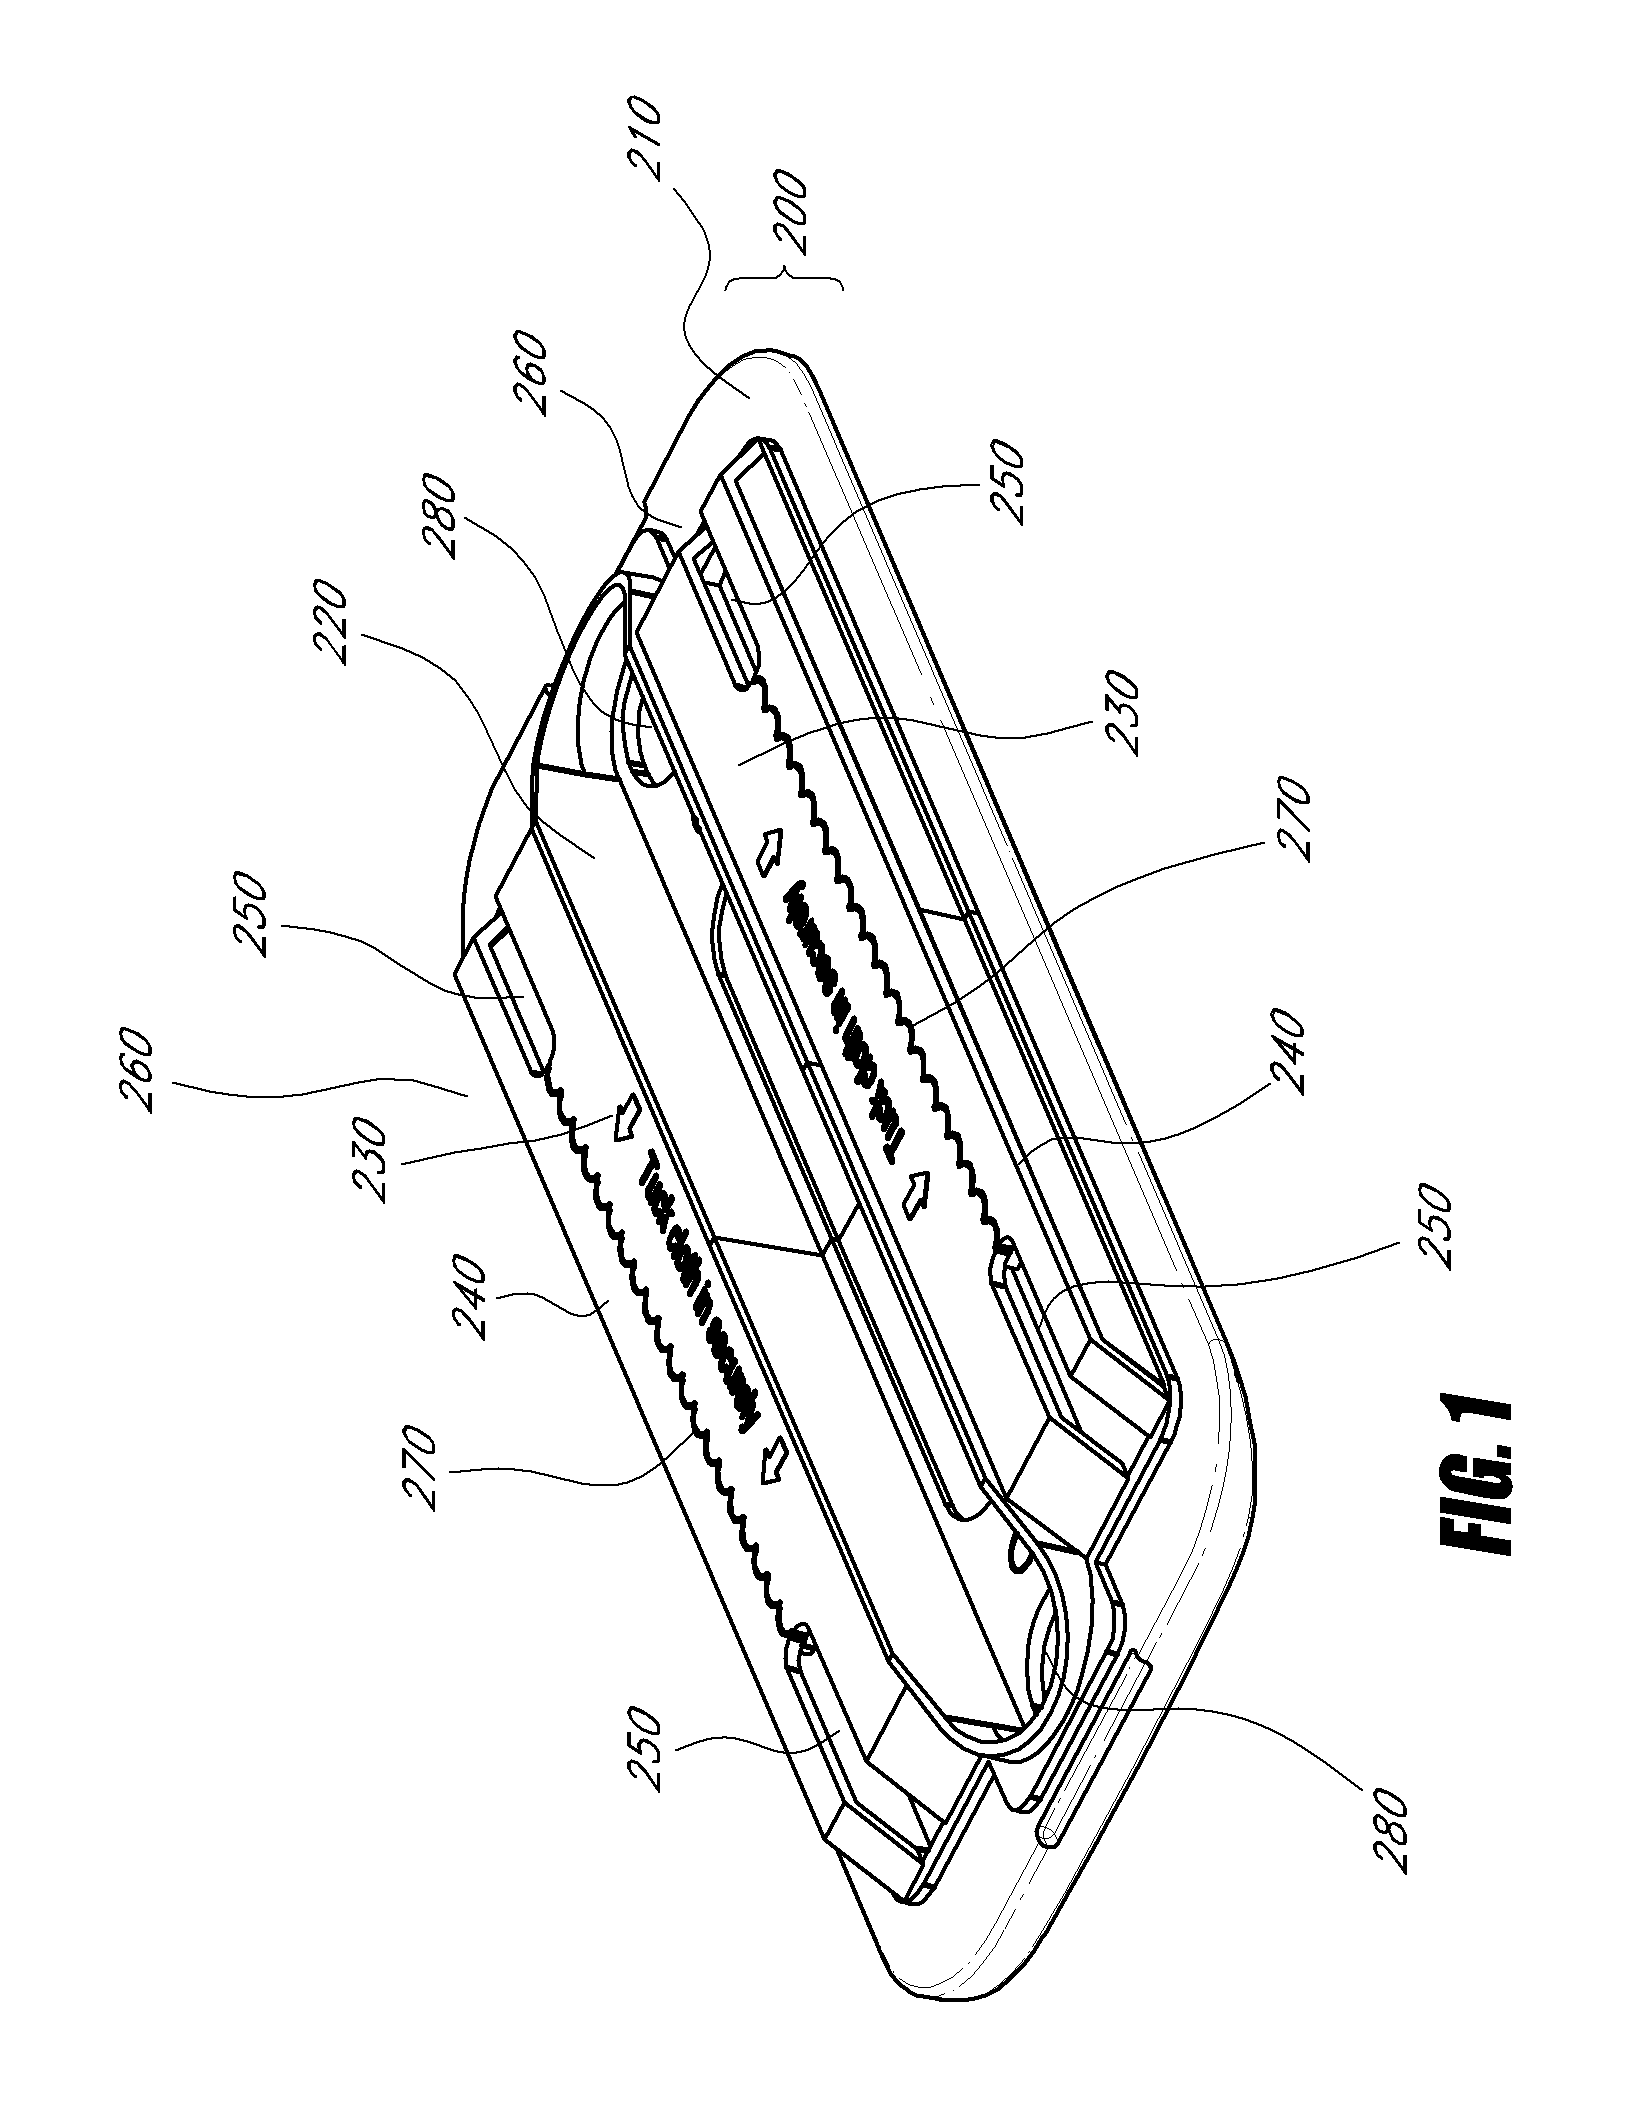 Apparatus for holding a cleaning sheet in a cleaning implement